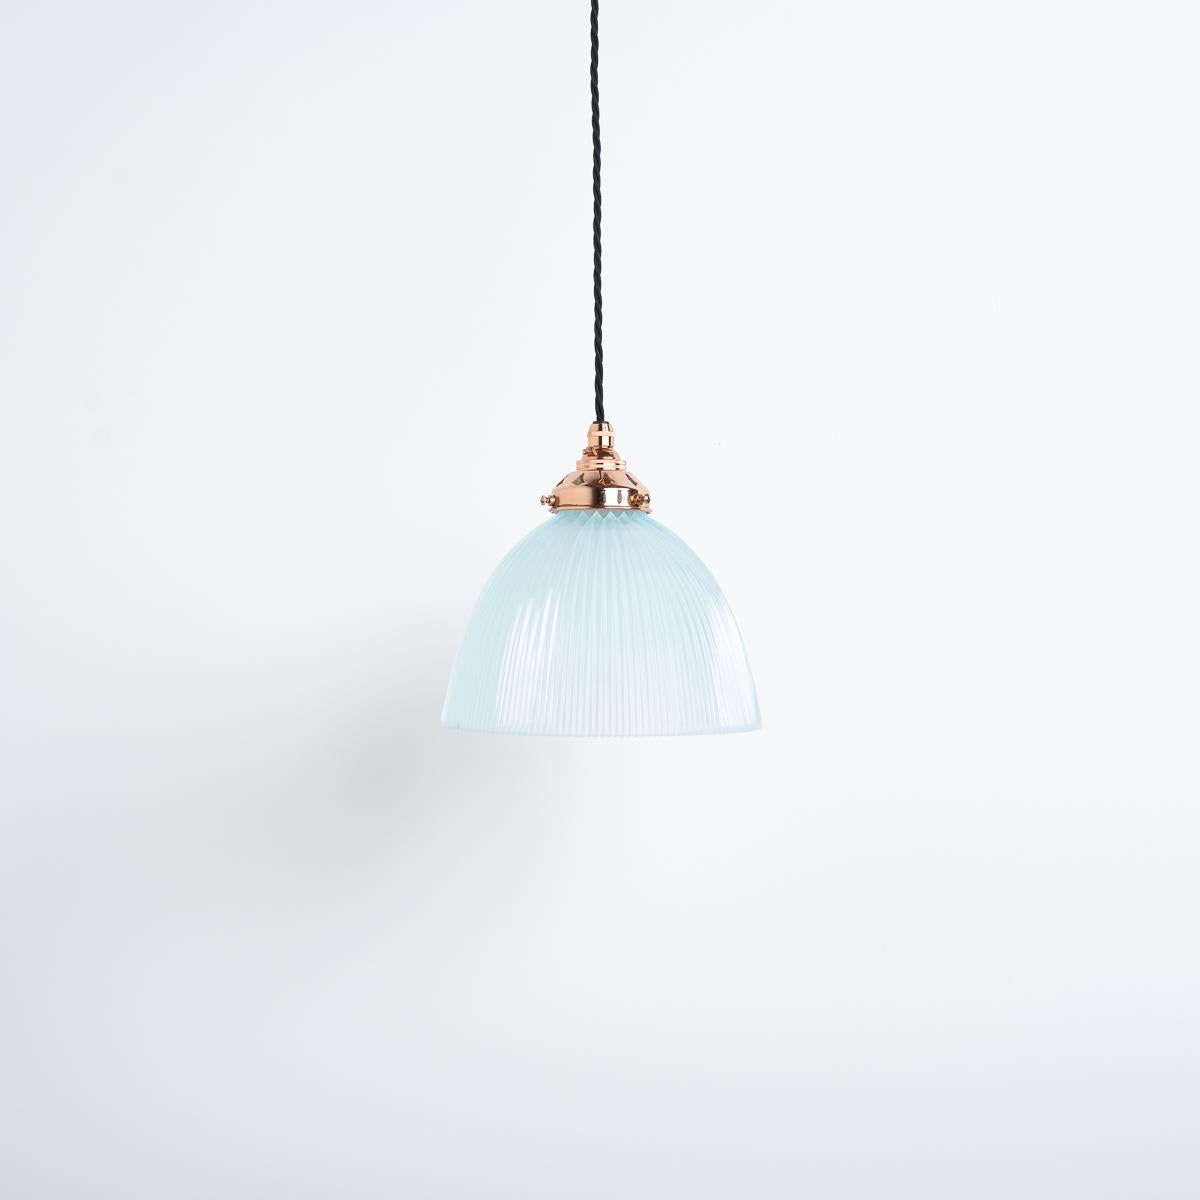 ANTIQUE HOLOPHANE E100 BLUE PRISMATIC GLASS PENDANT LIGHTS
4 Available at time of listing

Priced Individually

 

Rare and attractive vintage Holophane blue prismatic glass shades with polished copper fittings.

Bearing the Holophane makers marks,